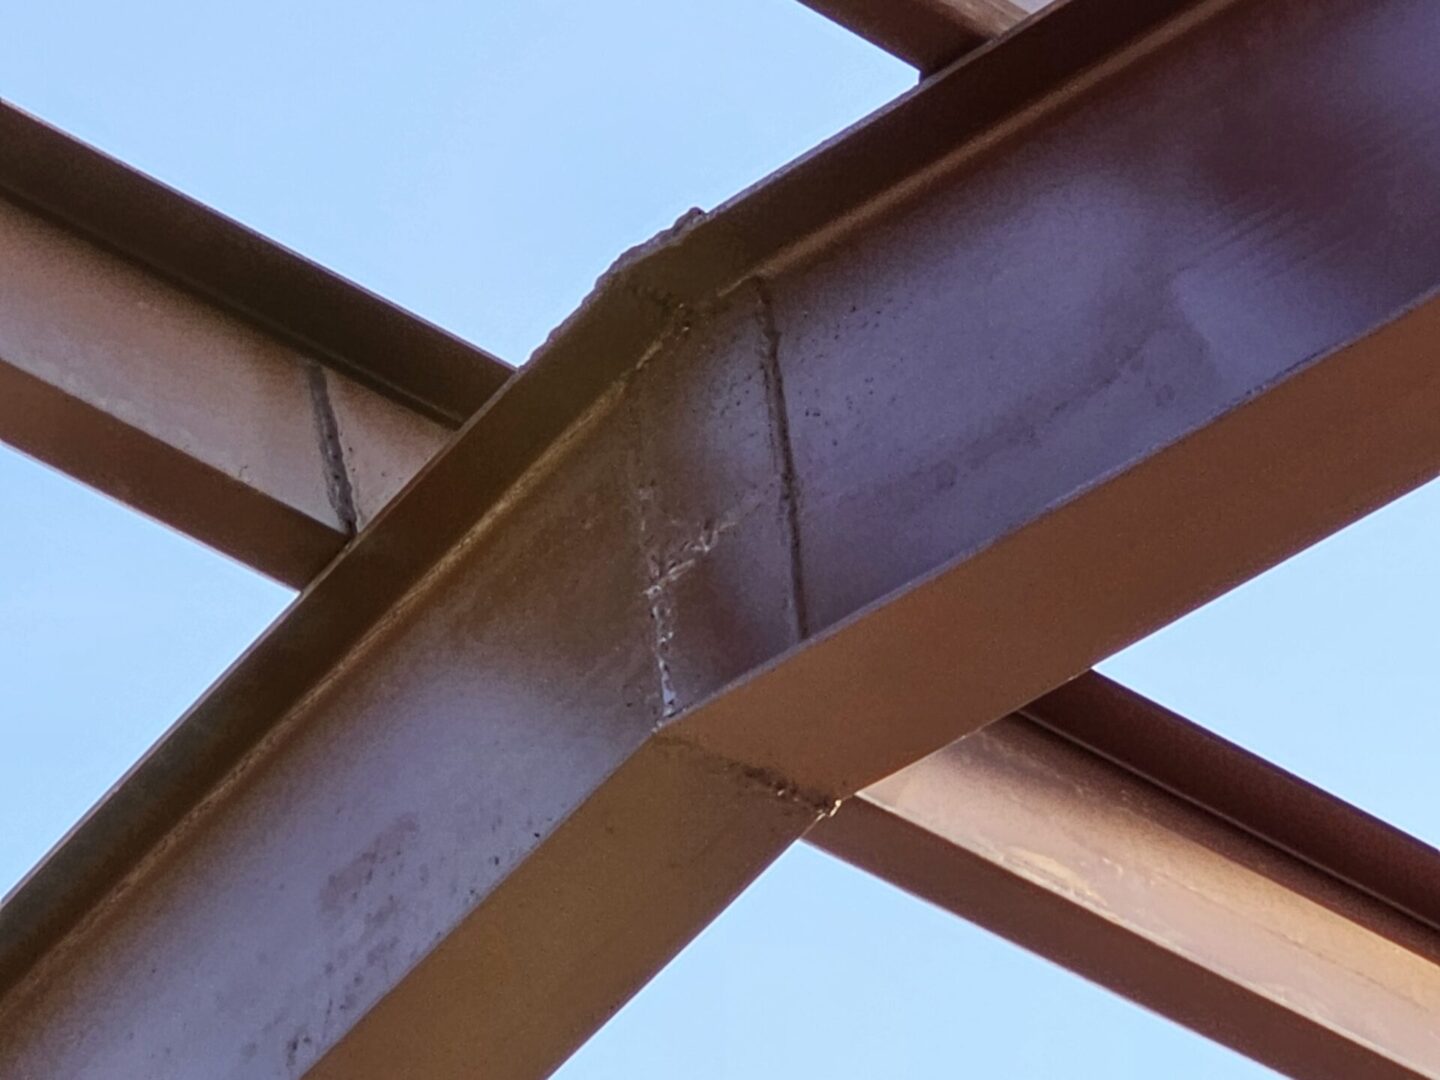 A close up of the bottom part of a metal structure.